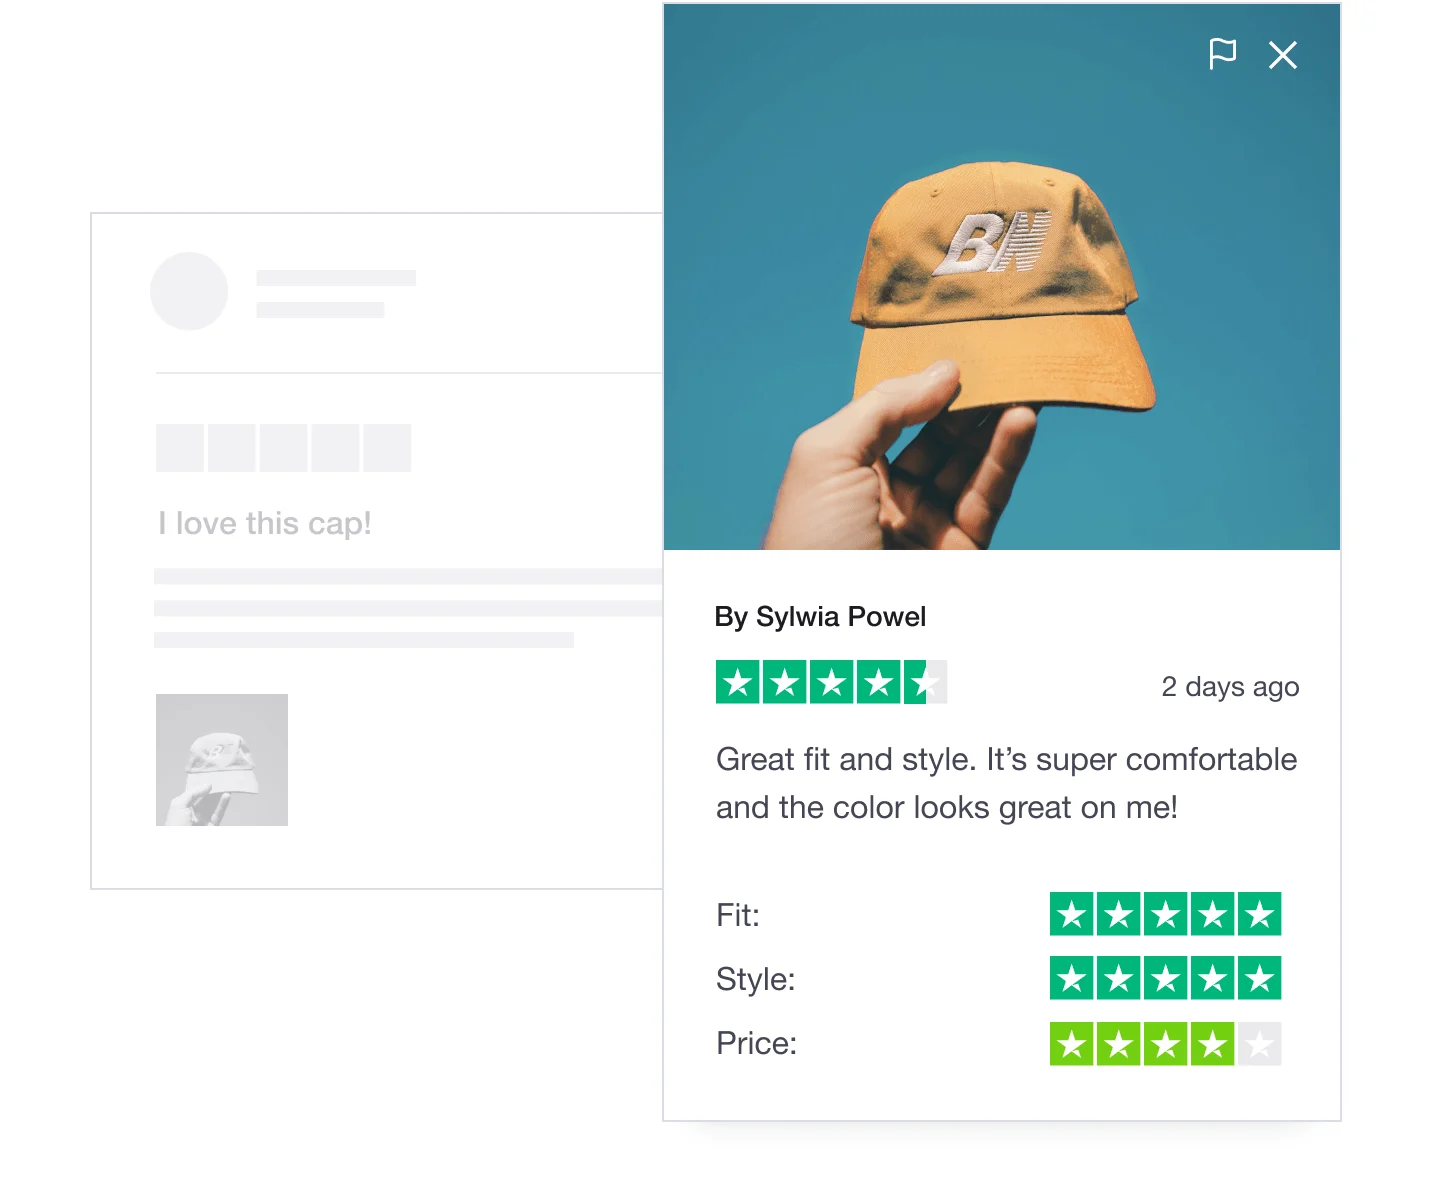 Trustpilot product review featuring a customer photo